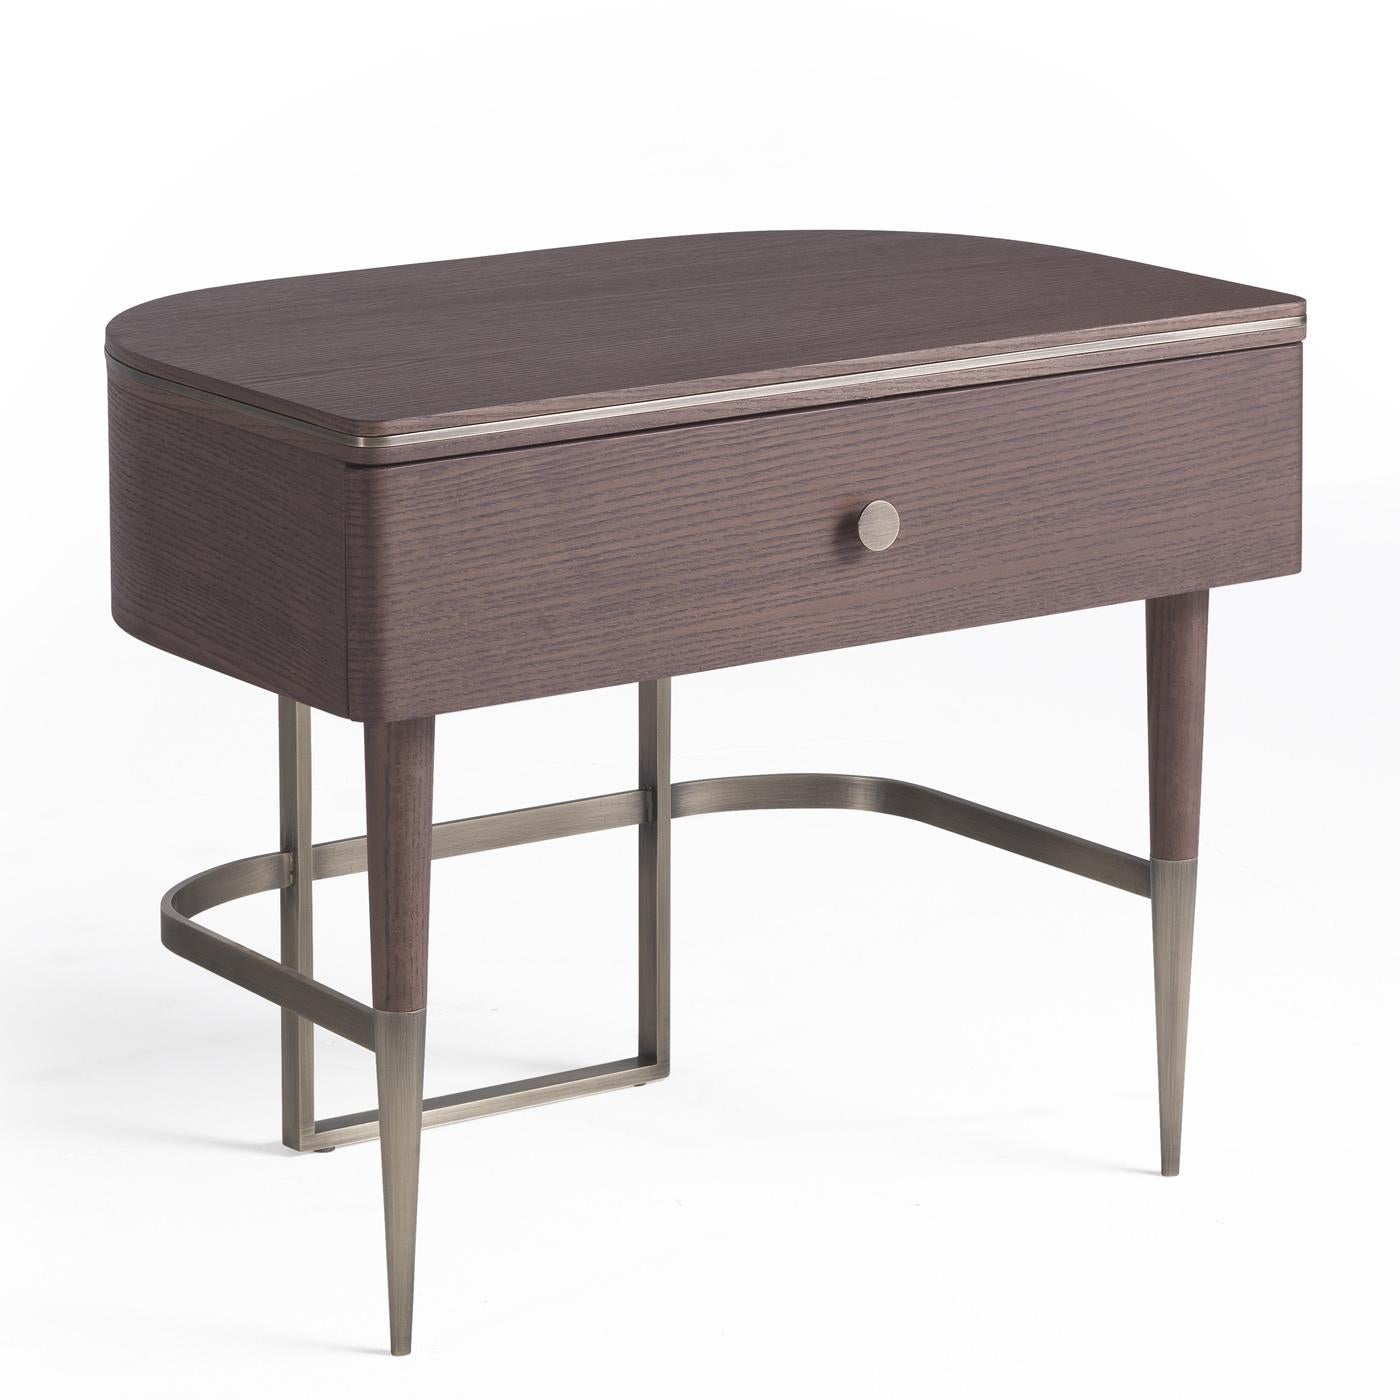 A splendid piece of Classic sophistication, this bedside table is entirely handcrafted of smoke-stained ashwood and is enriched with brushed brass details making up the feet and supporting structure. The legs measure 34.5 cm (total height 49.5